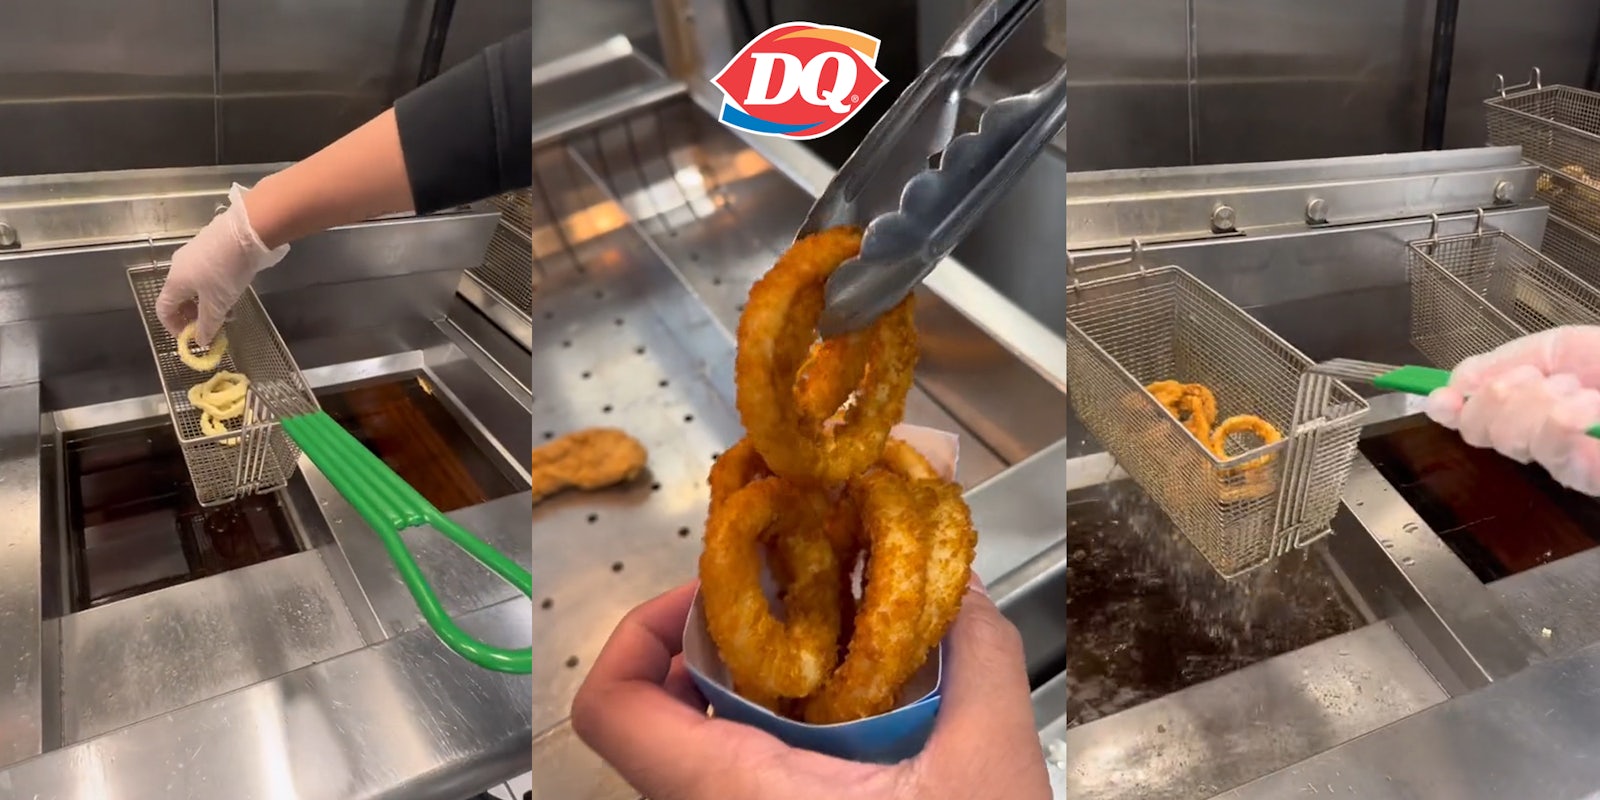 DQ employee putting onion rings in fryer (l) DQ employee putting onion rings in container with DQ logo above (c) DQ employee taking onion rings out of the fryer (r)